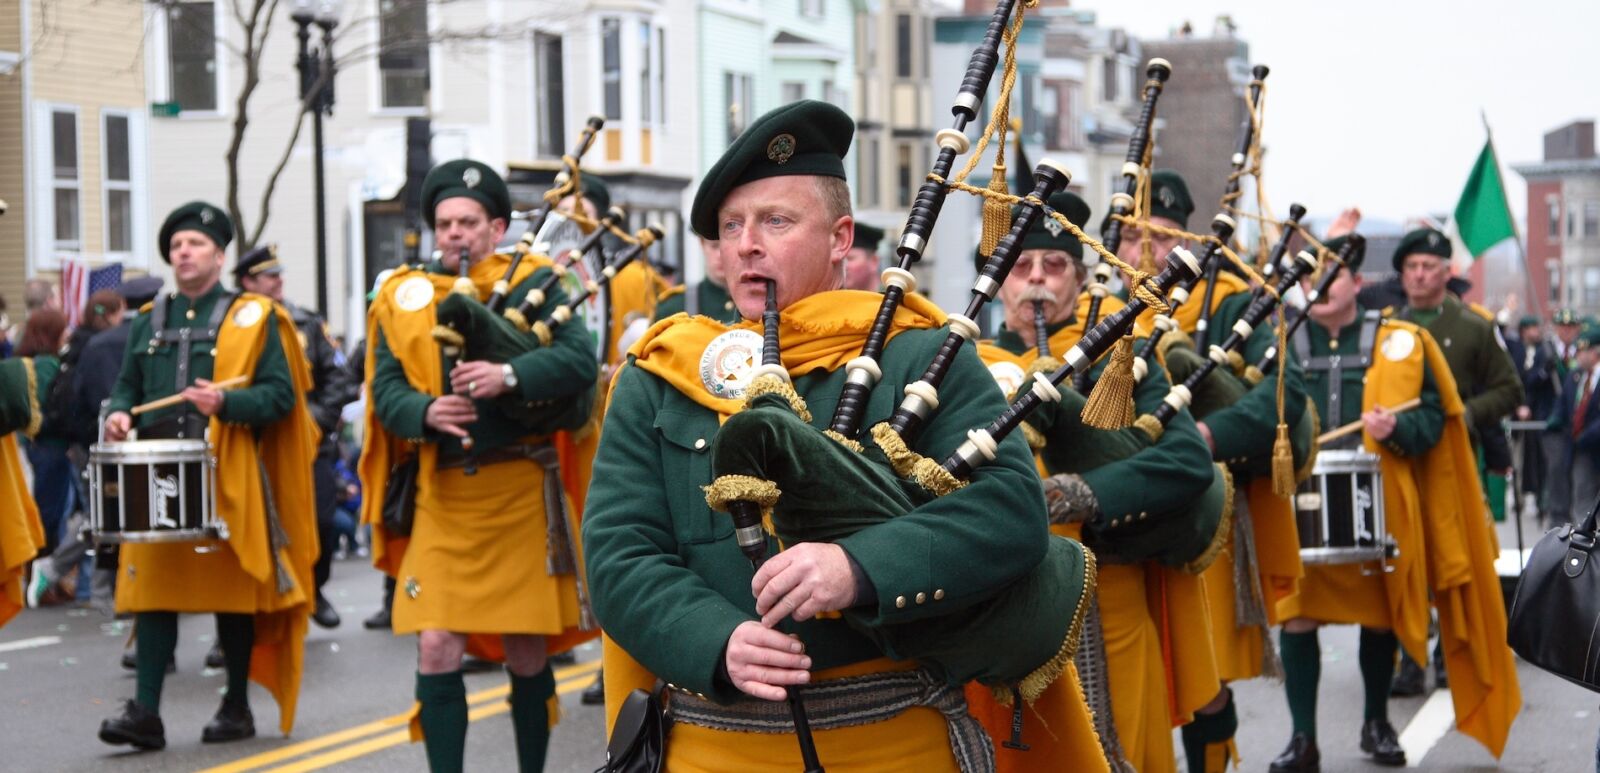 BOSTON, MASSACHUSETTS - MARCH 16: Irishmen in his kilt playing his bagpipe during the St. Patrick's Day Parade held March 16, 2008. The event was held in Boston, Massachusetts. Photo via Shutterstock.